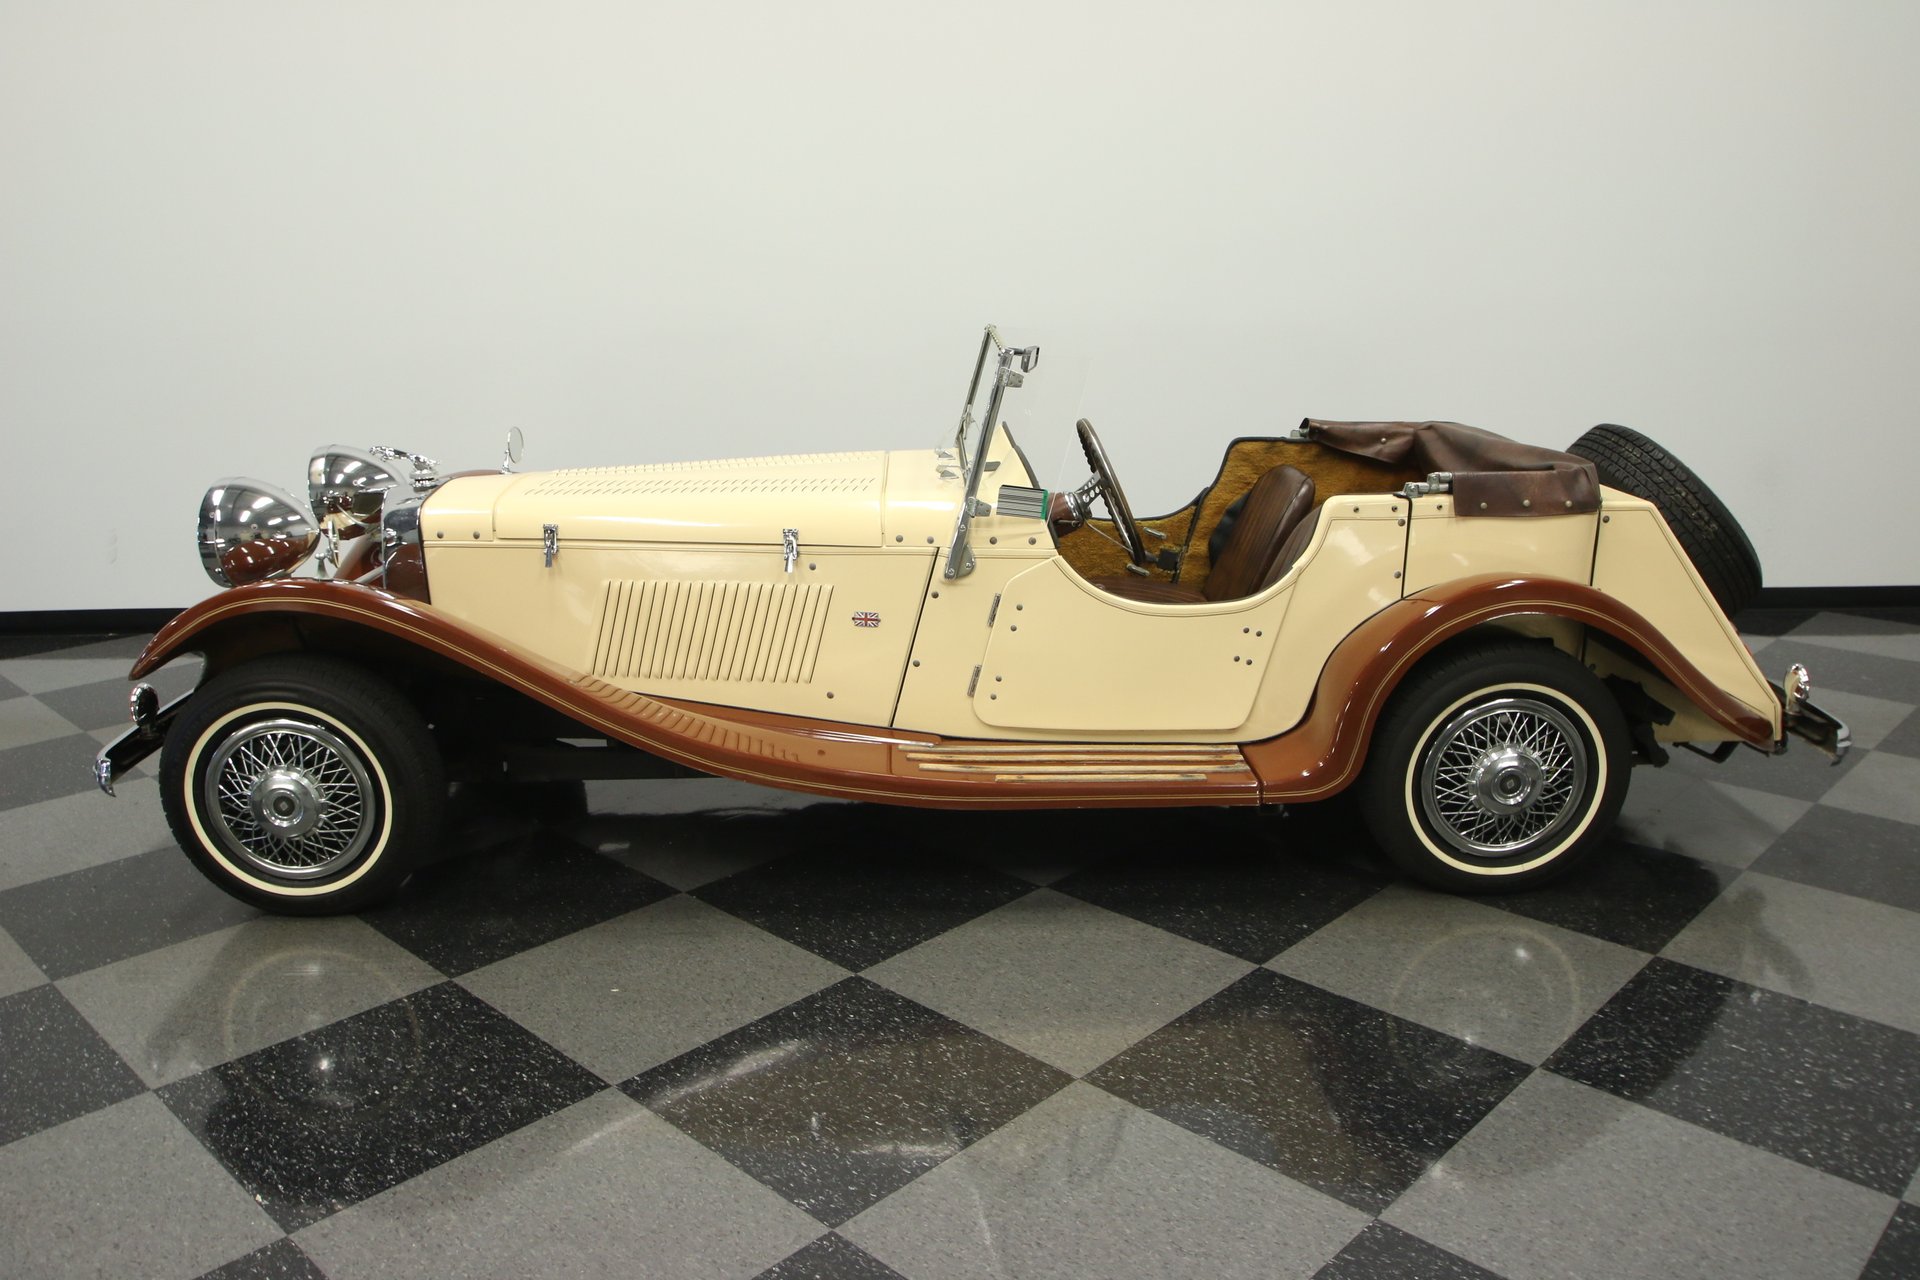 1937 Jaguar SS100 roadster replica double sided 8 1/2x11inch.color picture $7.00 